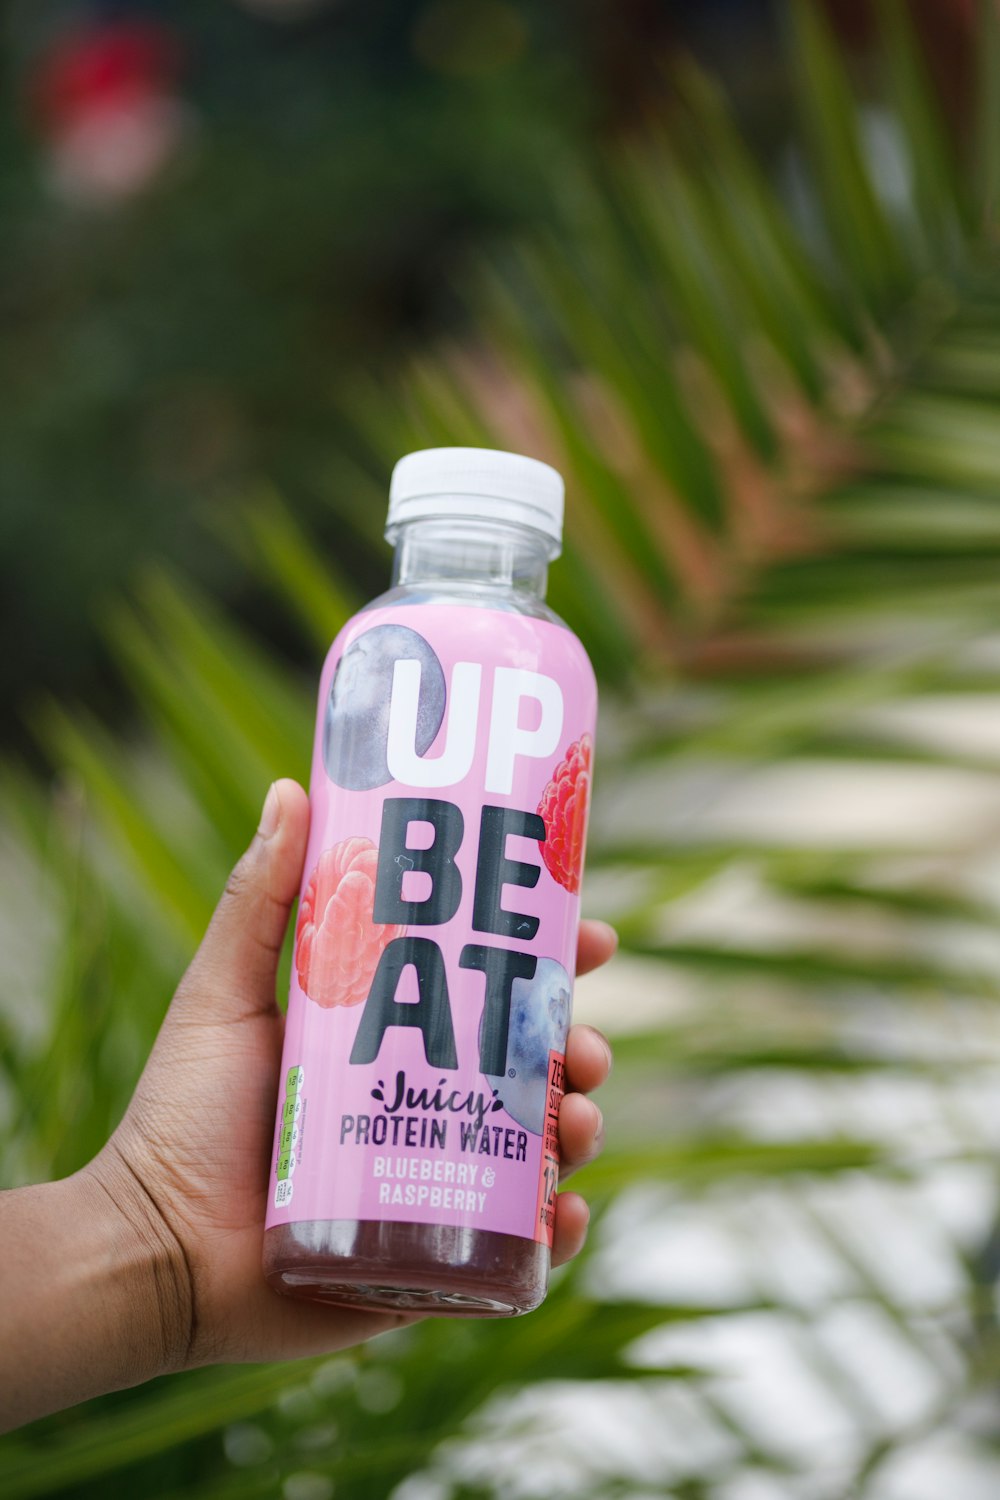 Up Beat protein water bottle